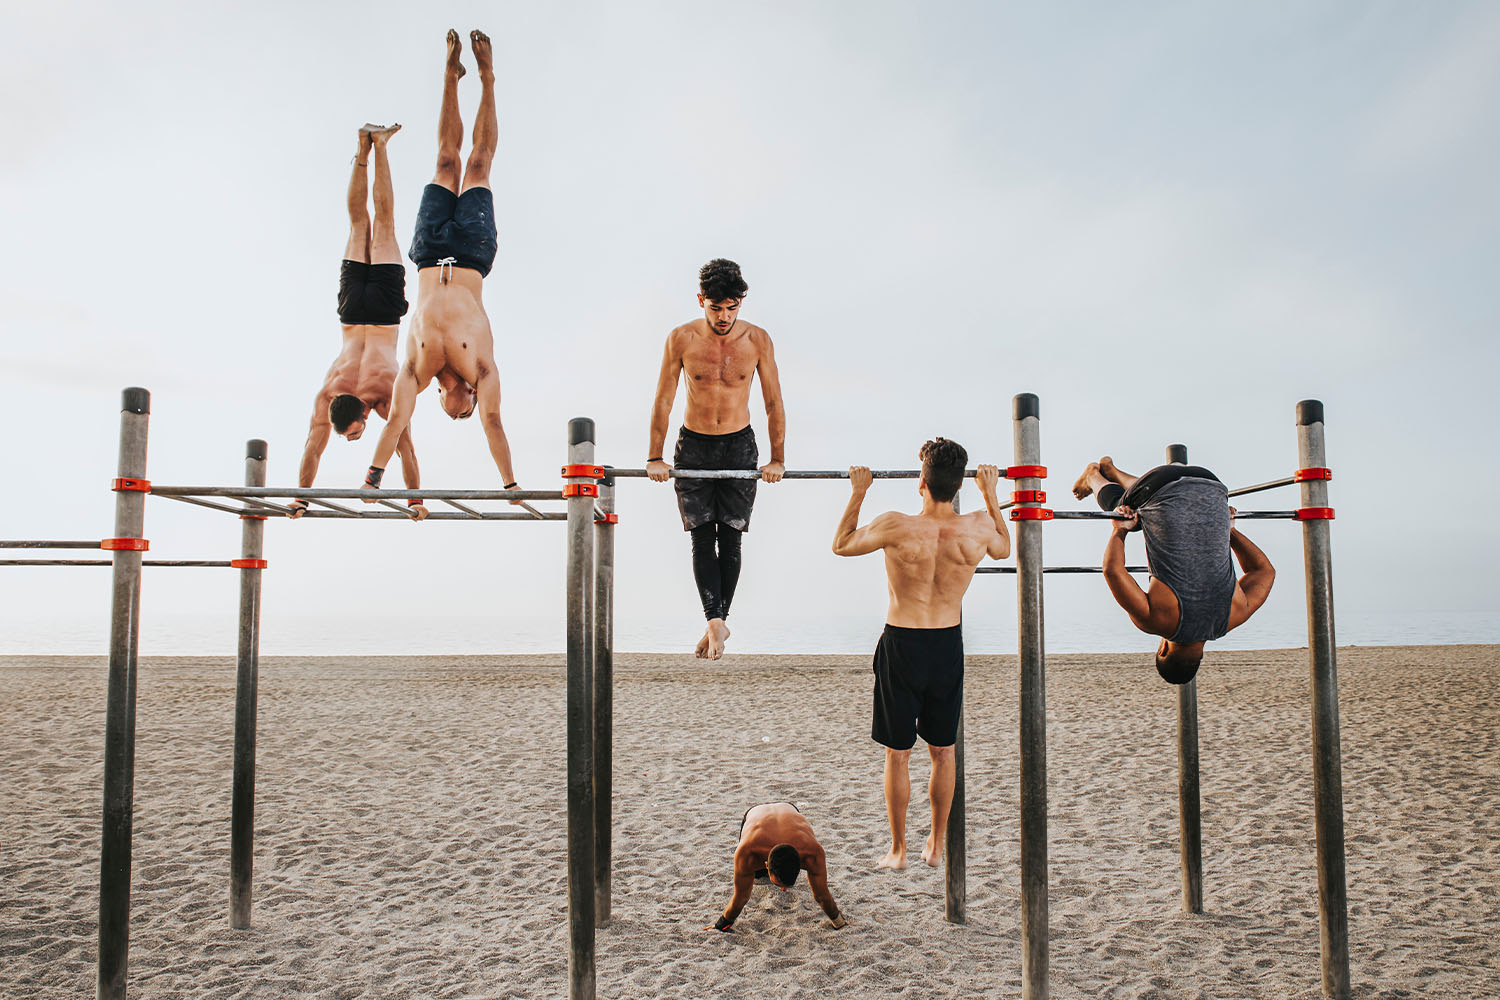 The Ultimate Guide to Calisthenics Workout to Build Strong Physique